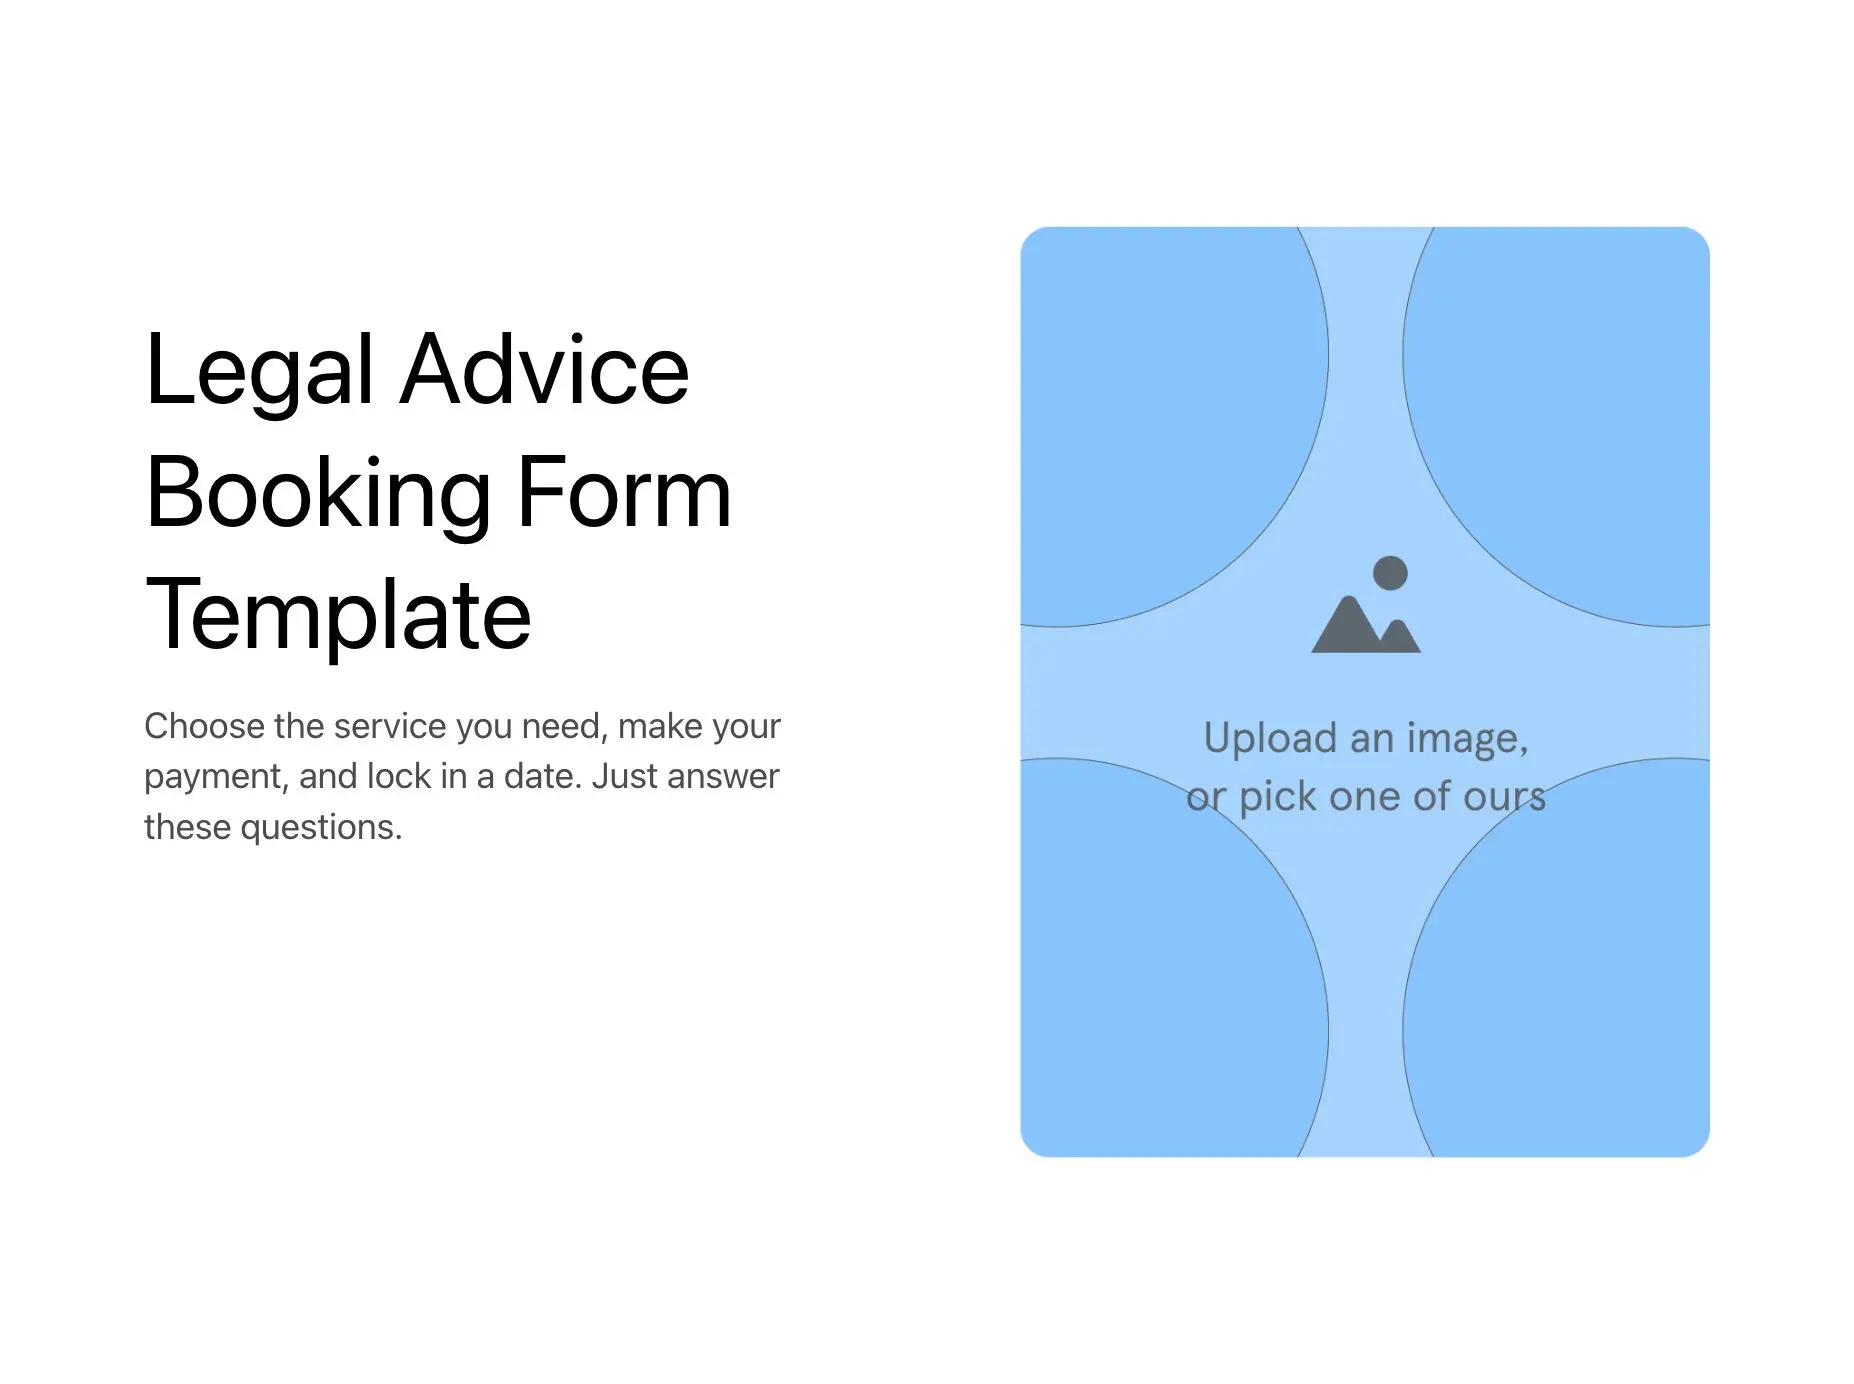 Legal Advice Booking Form Template Hero